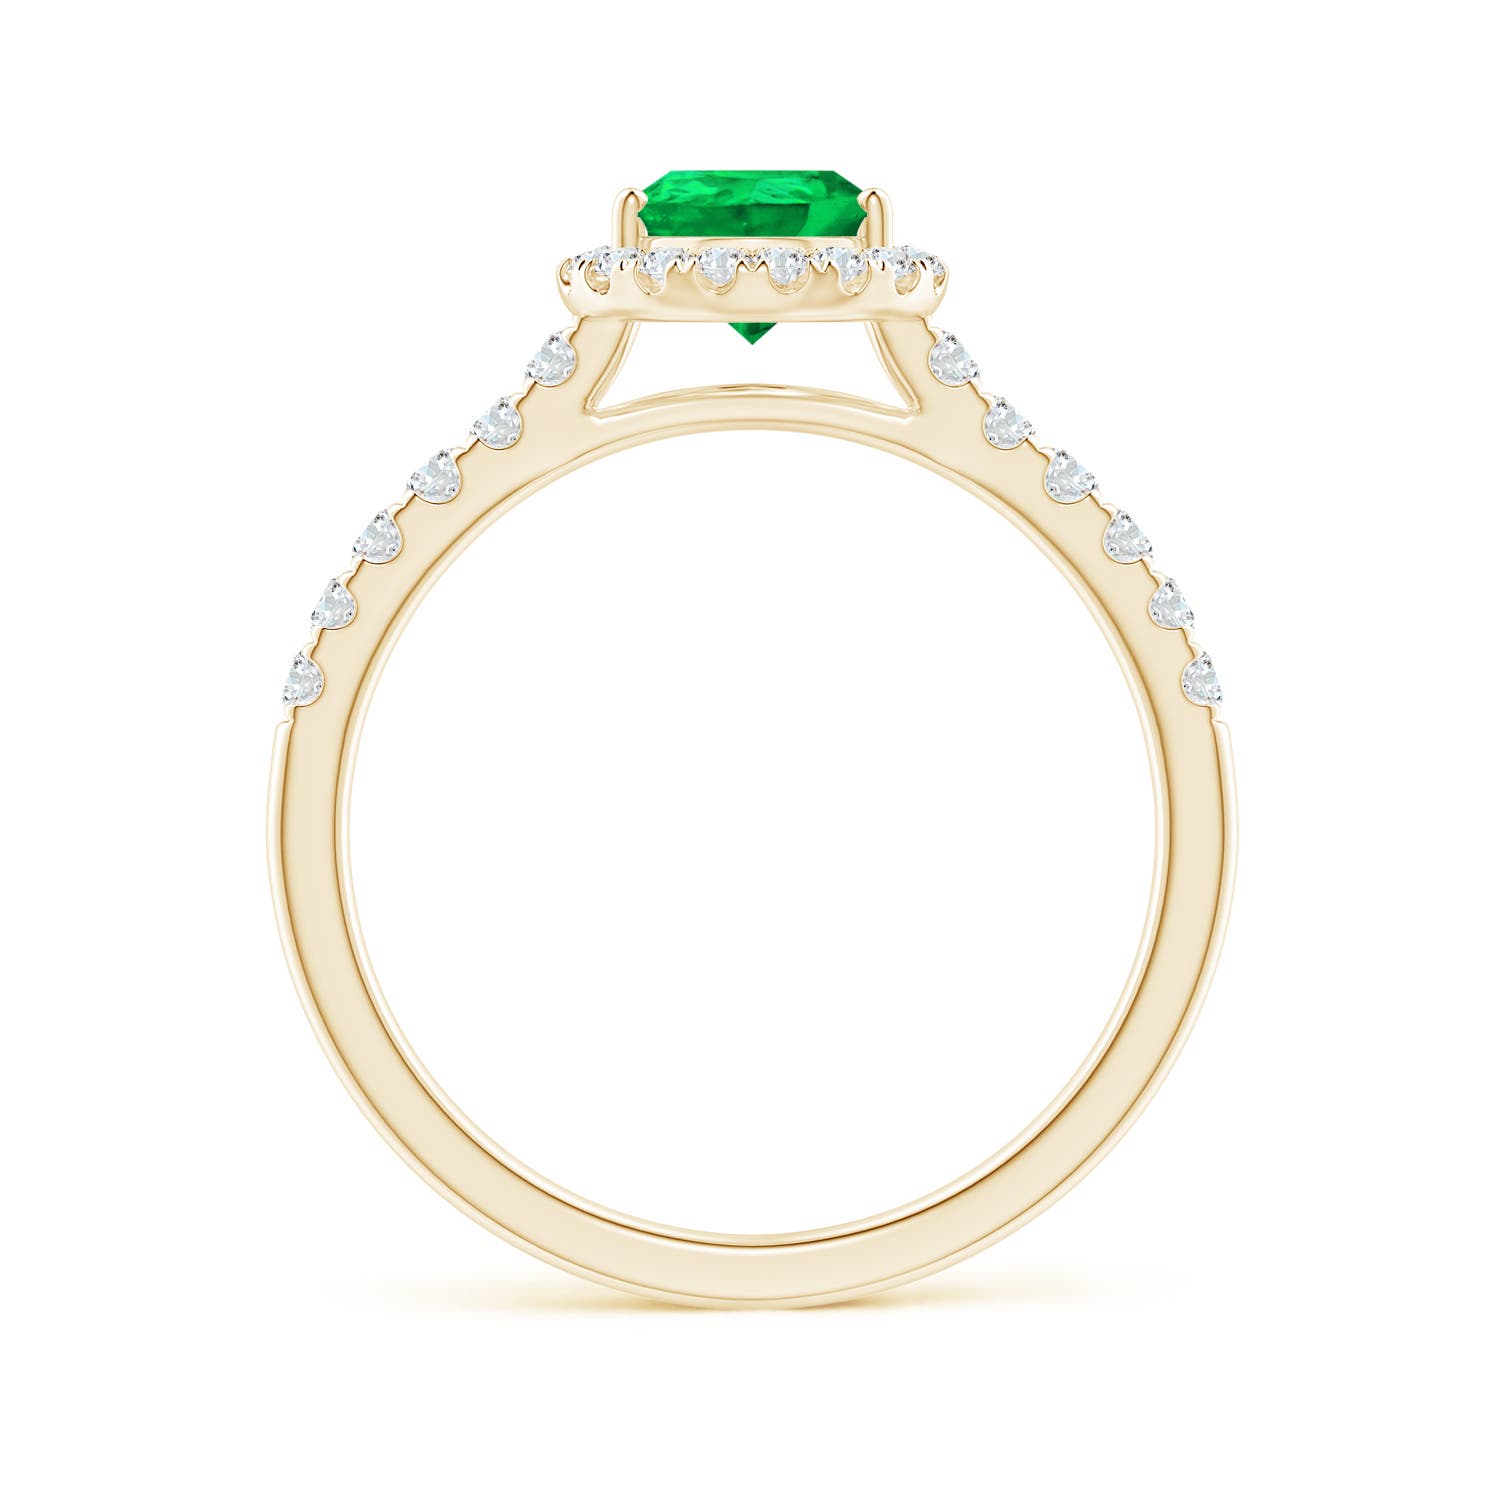 AAA - Emerald / 1.32 CT / 14 KT Yellow Gold